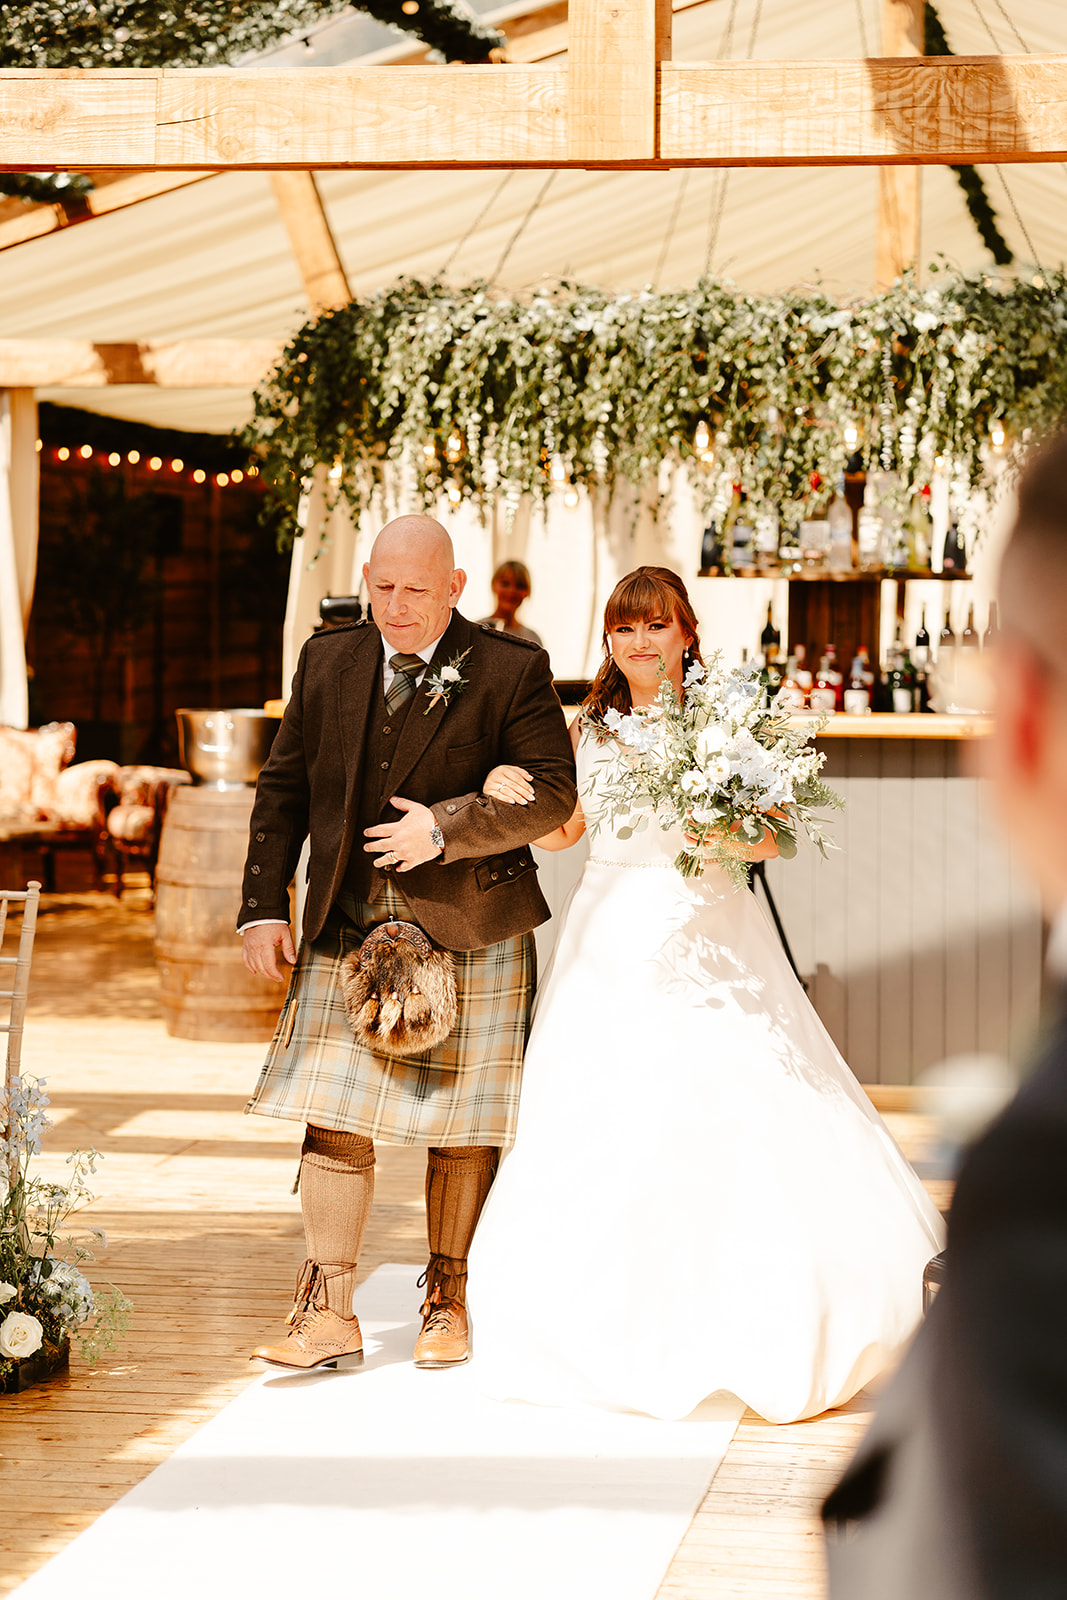 Bride walking down the aisle with her father at Elrick House Wedding Venue